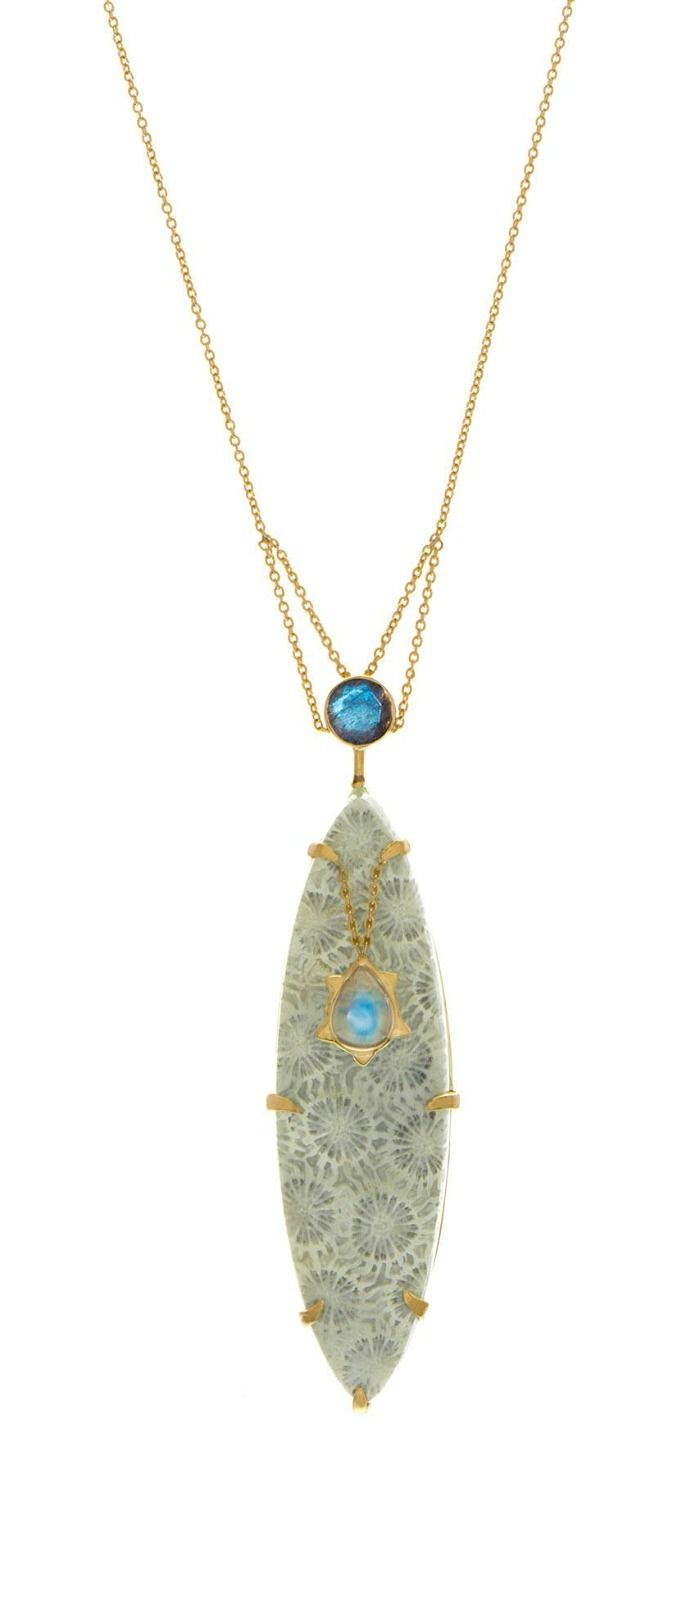 A glorious gemstone and gold necklace from Unhada jewelry's Dynasty collecti...